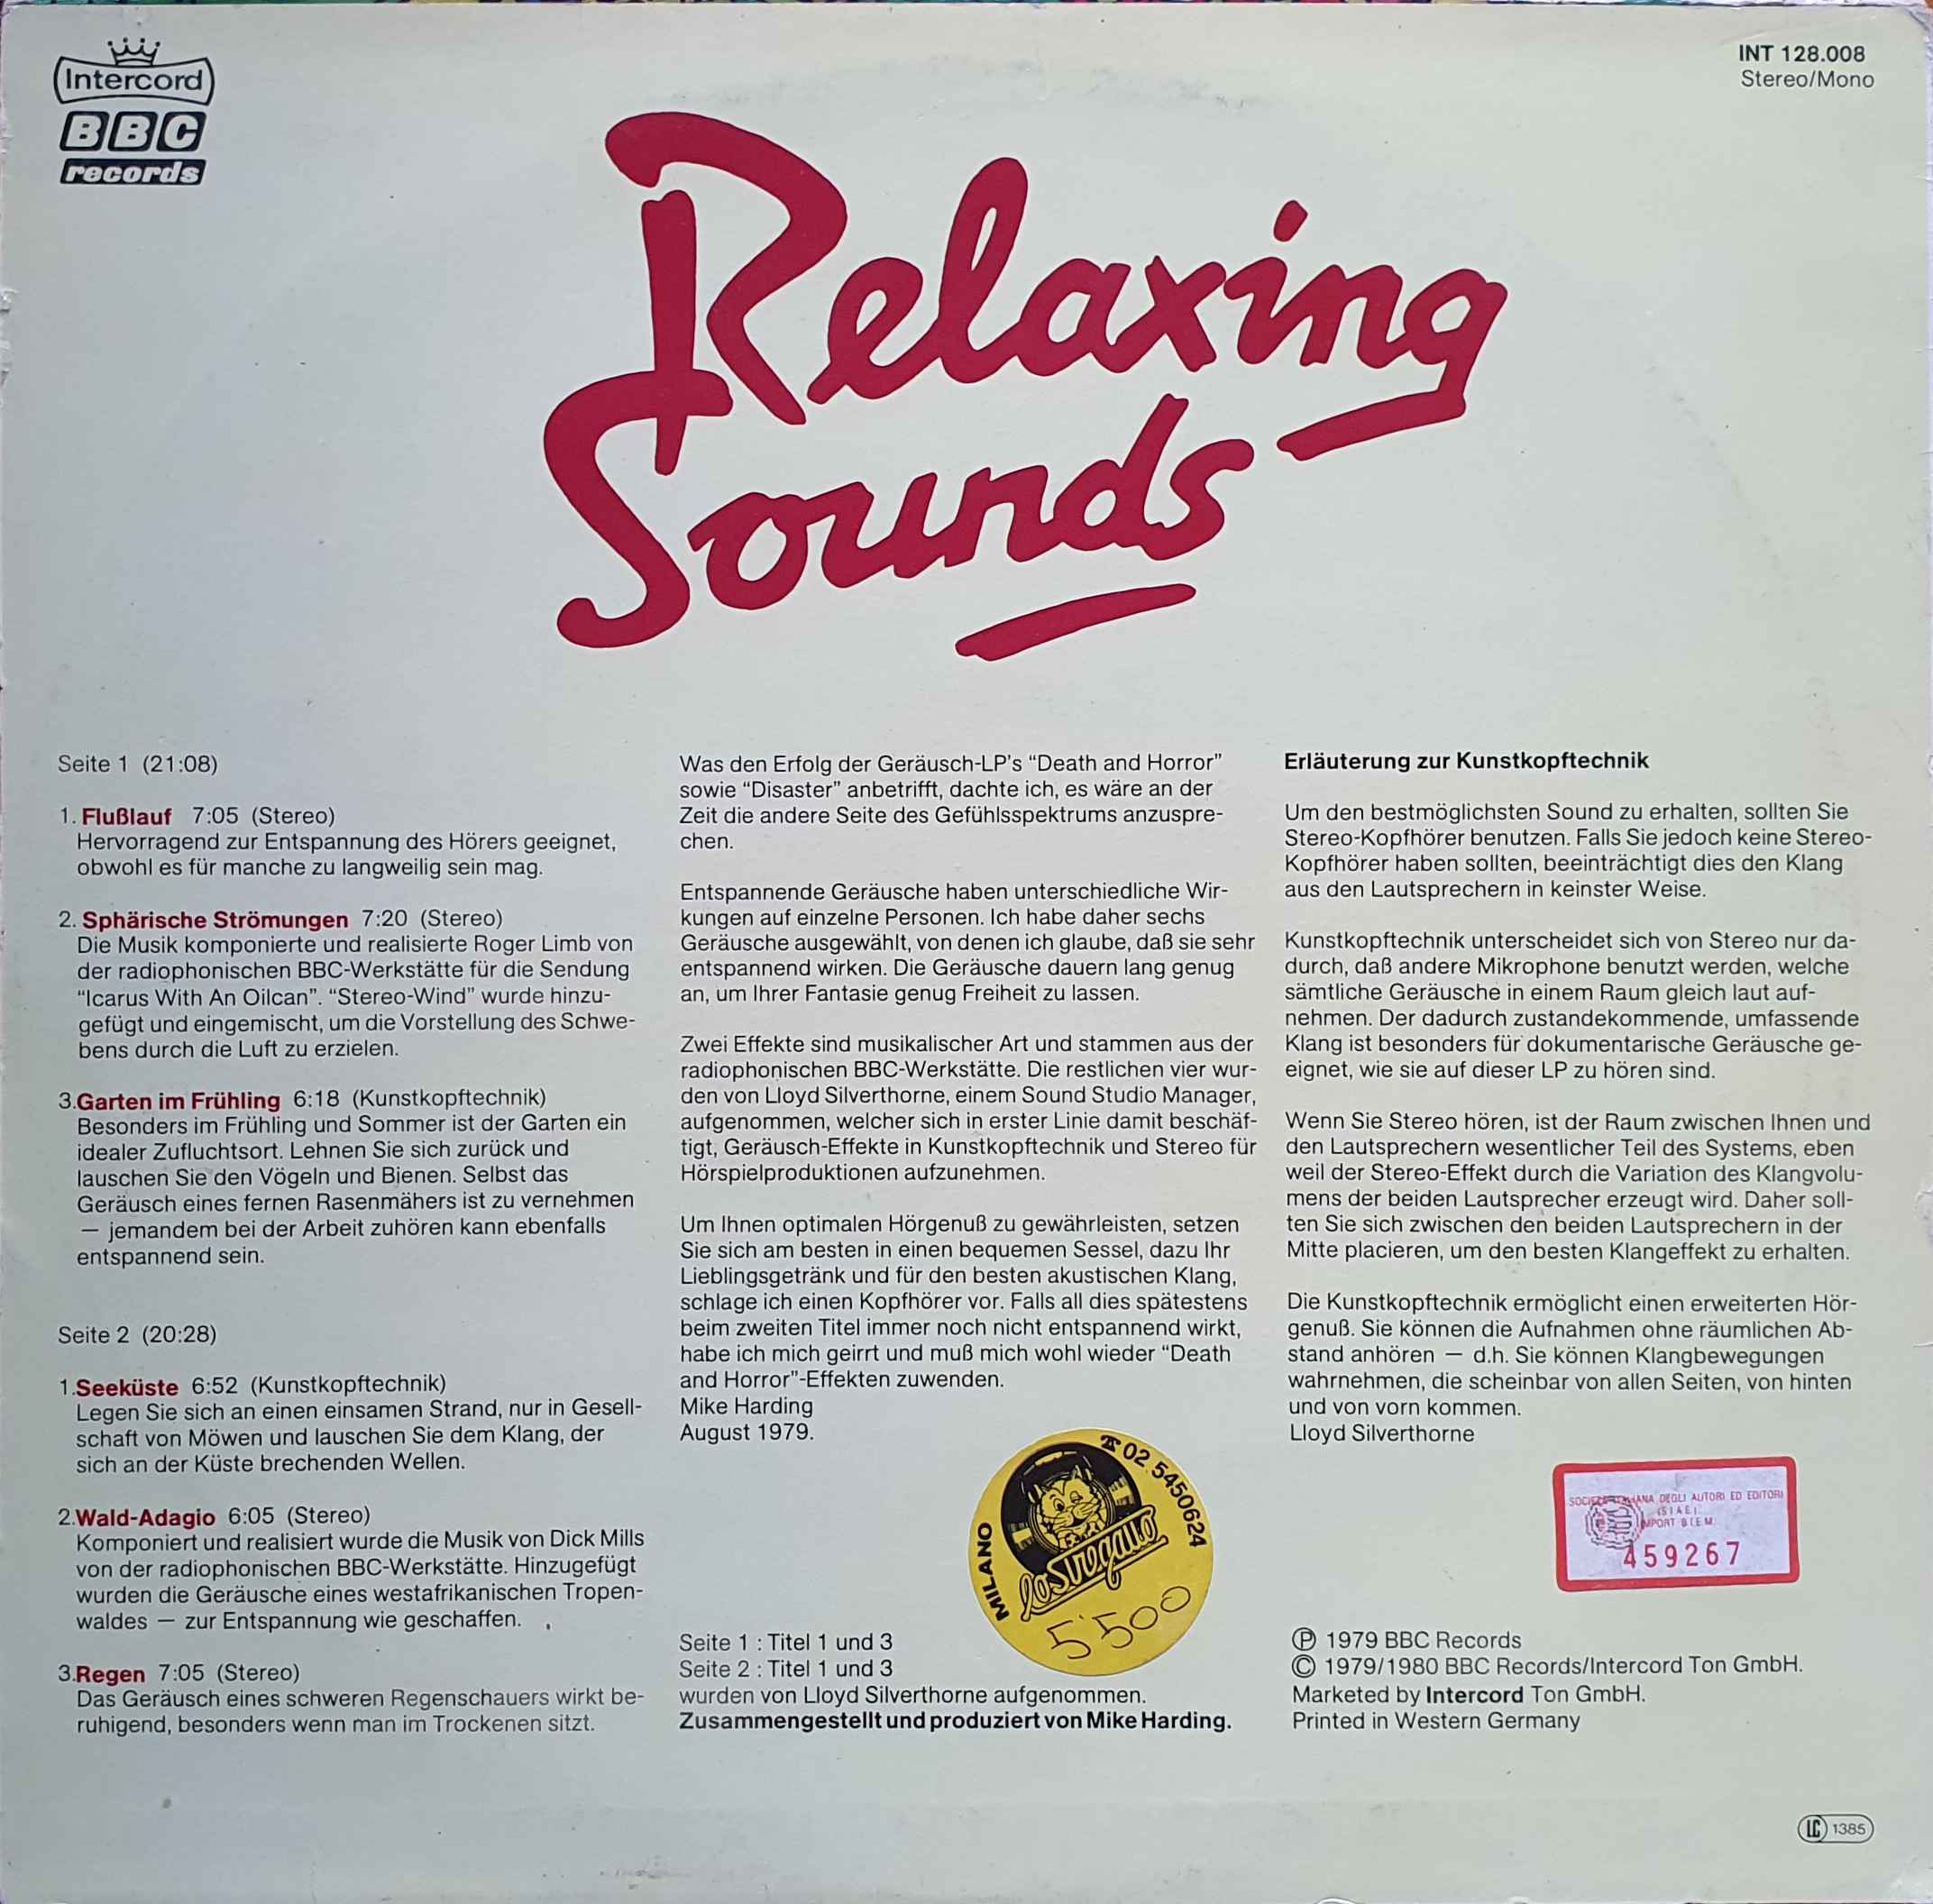 Picture of INT 128.008 Relaxing sounds by artist Various from the BBC records and Tapes library